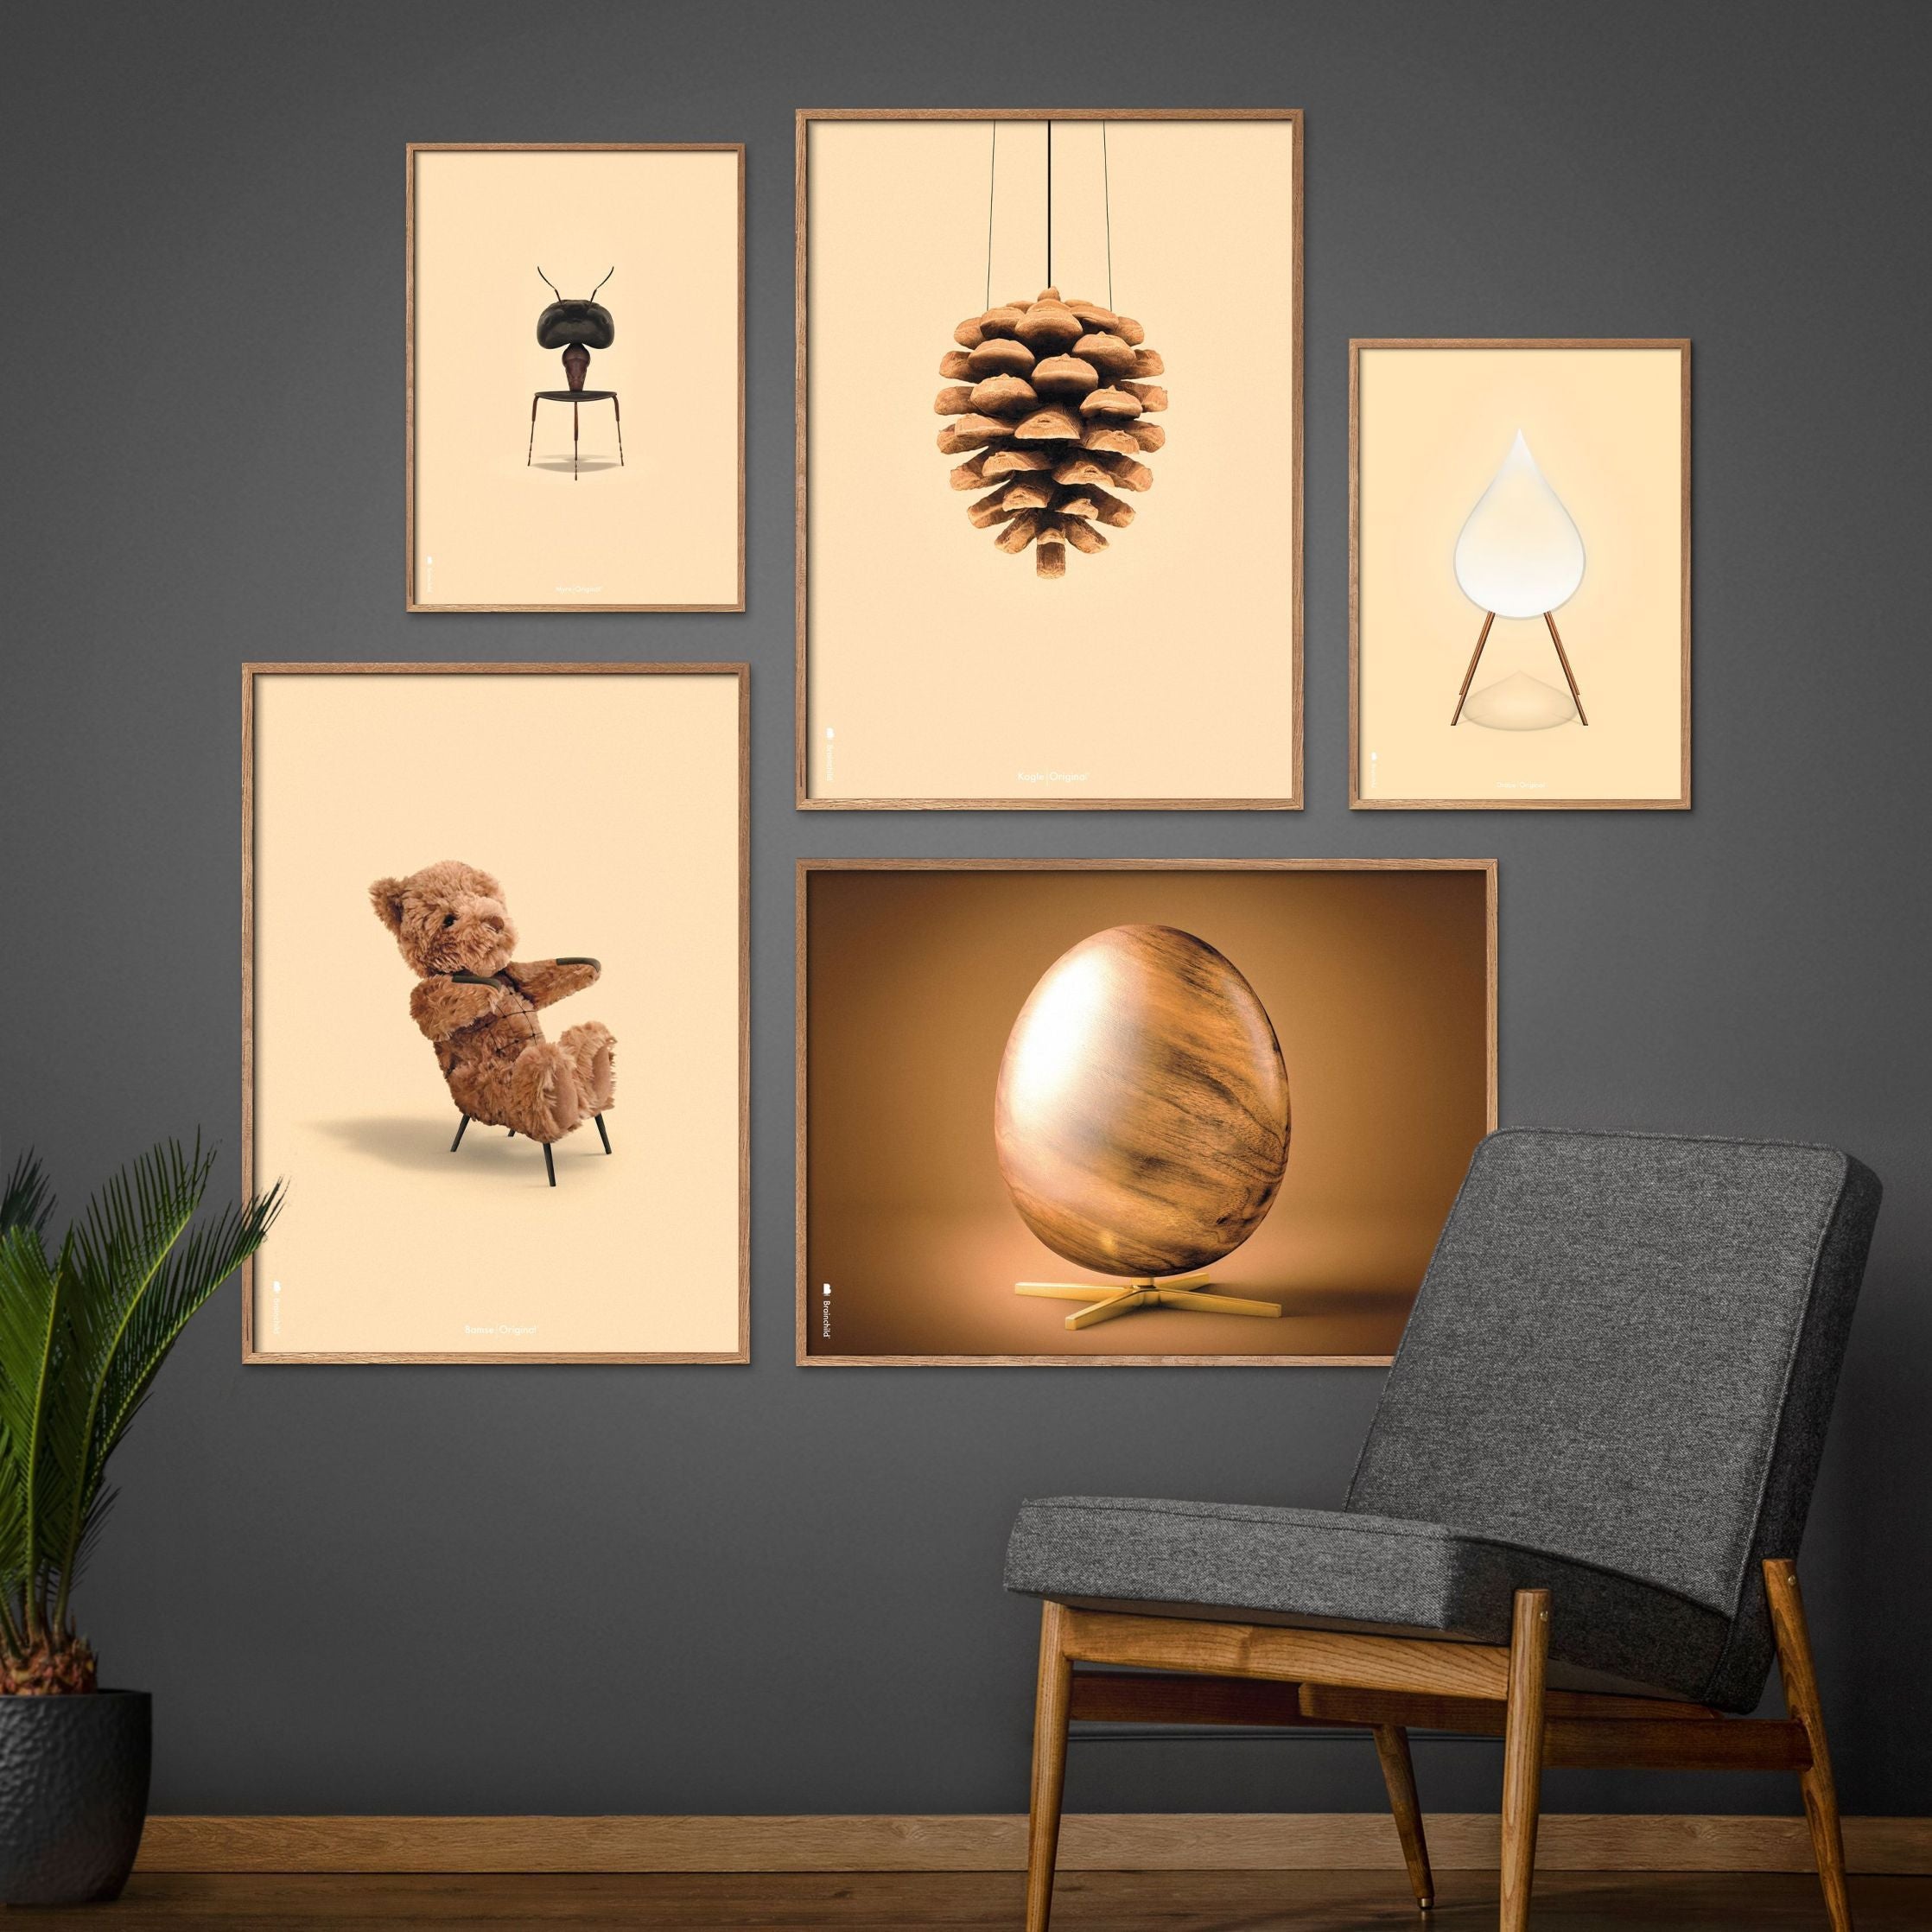 Brainchild Drop Classic Poster, Frame In Black Lacquered Wood 30x40 Cm, Sand Colored Background